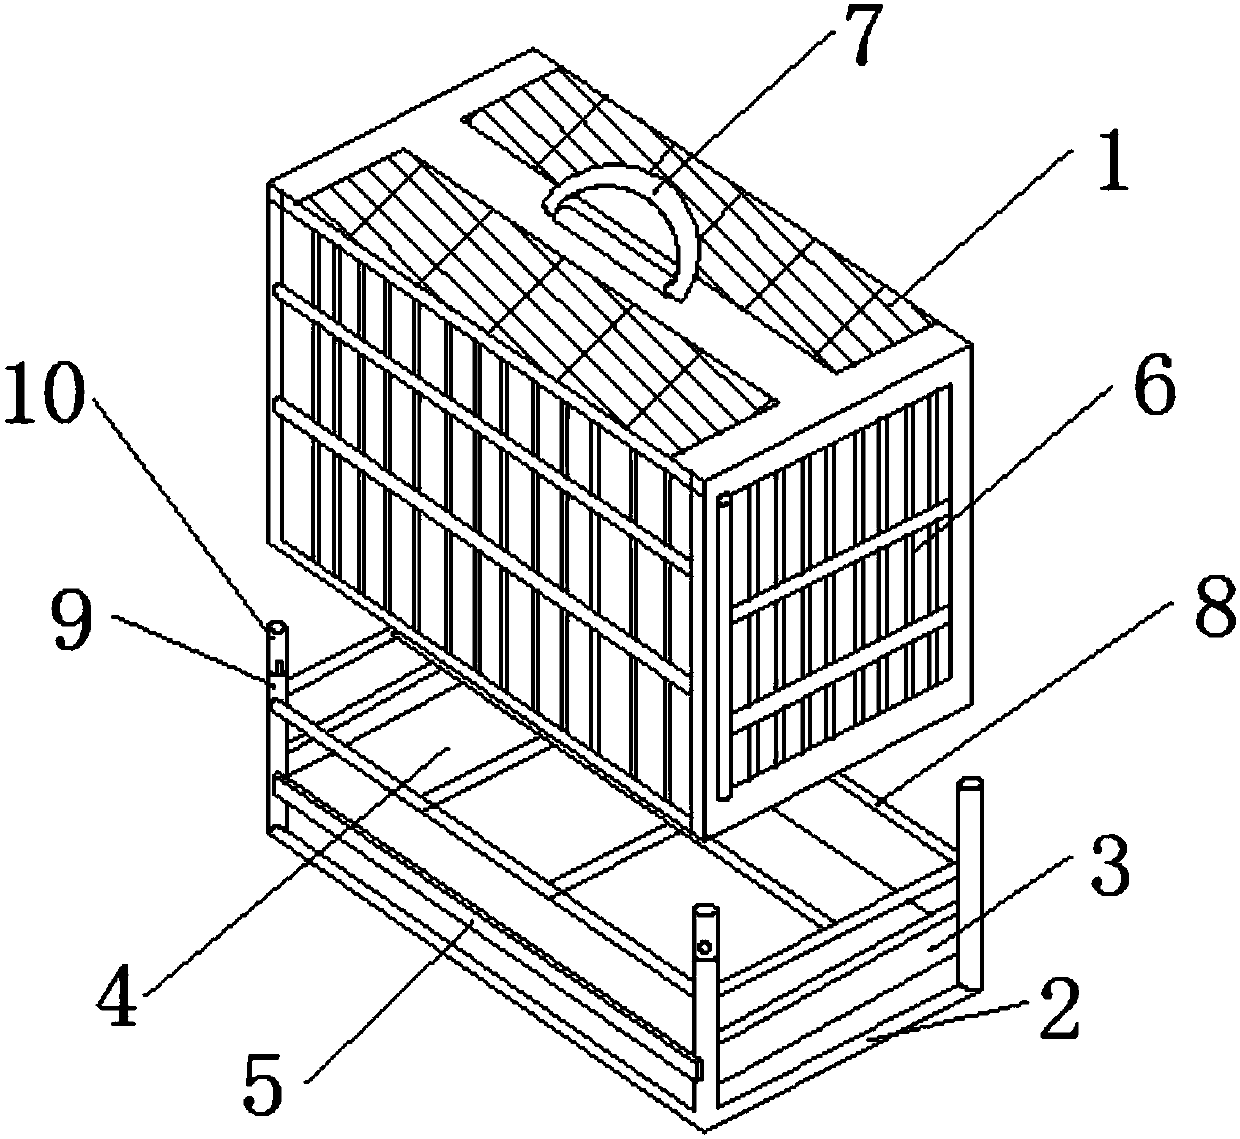 Poultry feeding device facilitating capturing